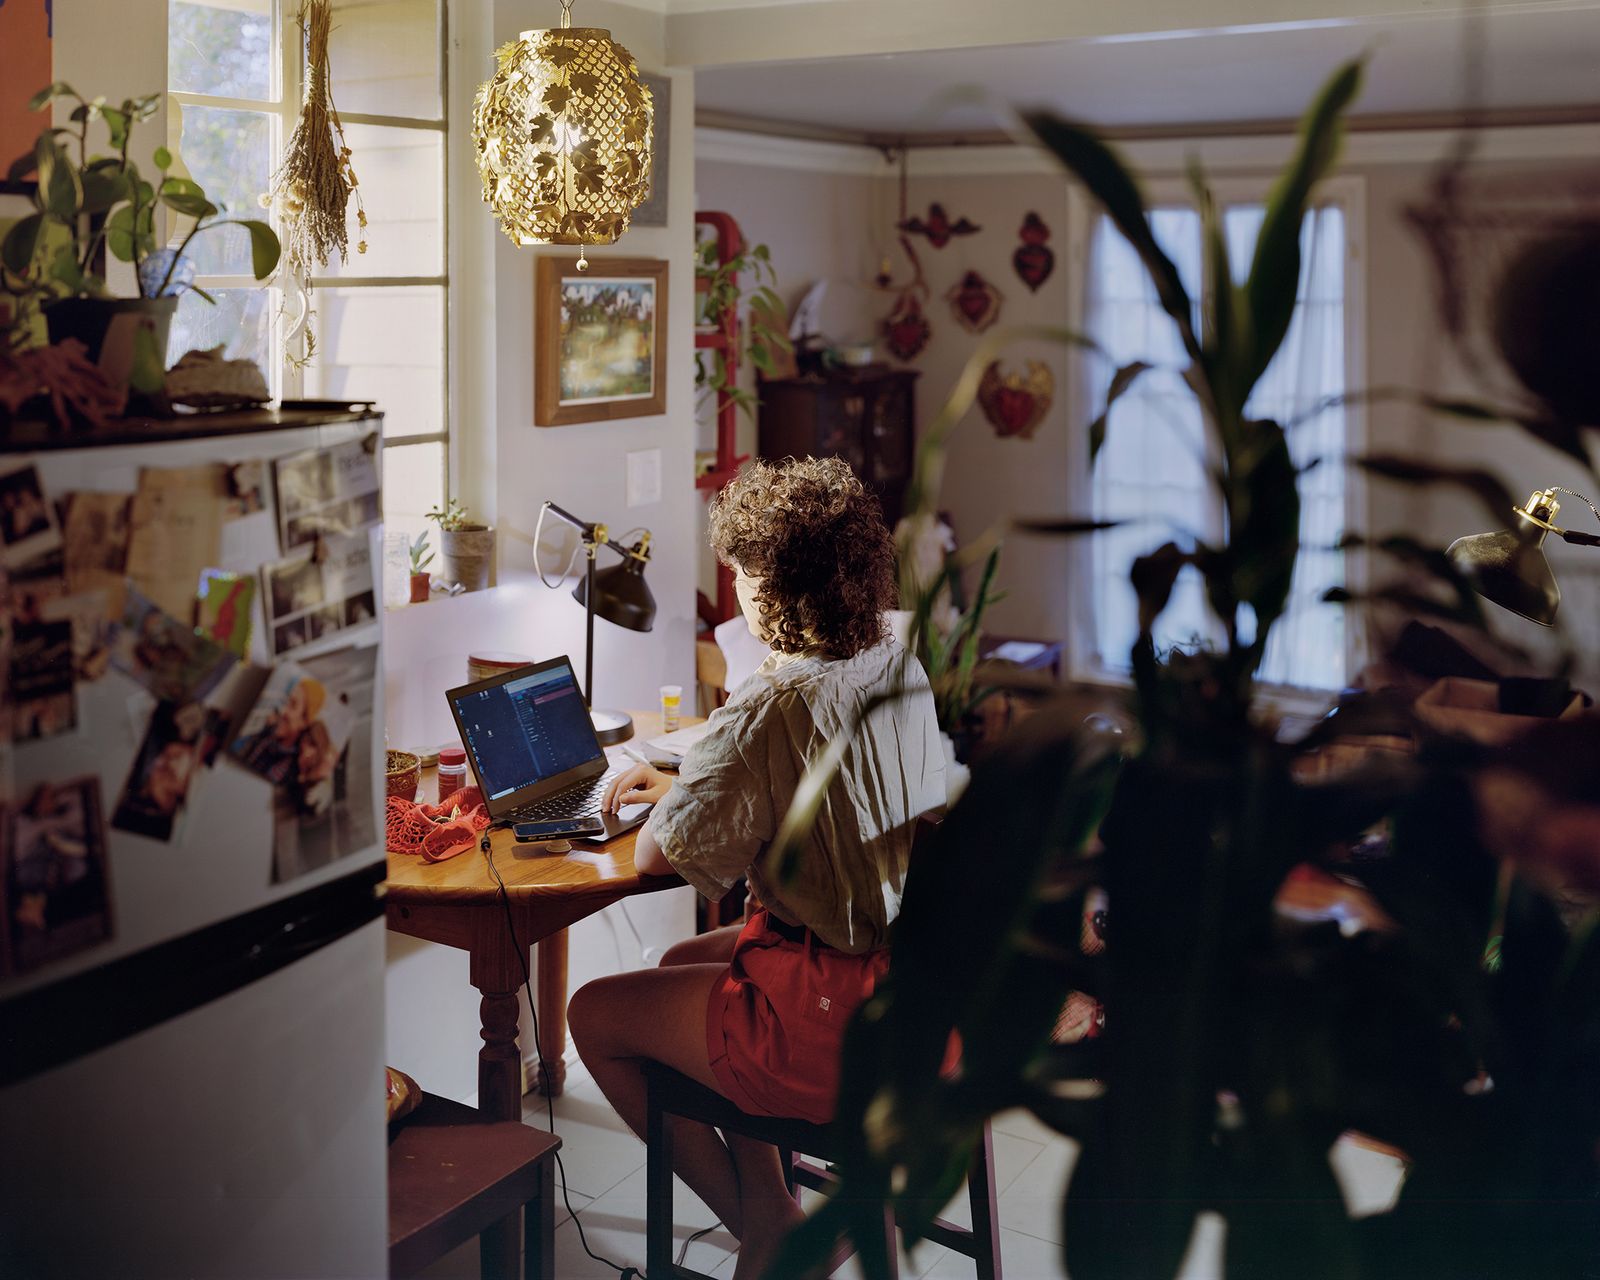 © Paloma Dooley - J. Working From Home in Brianna's Kitchen